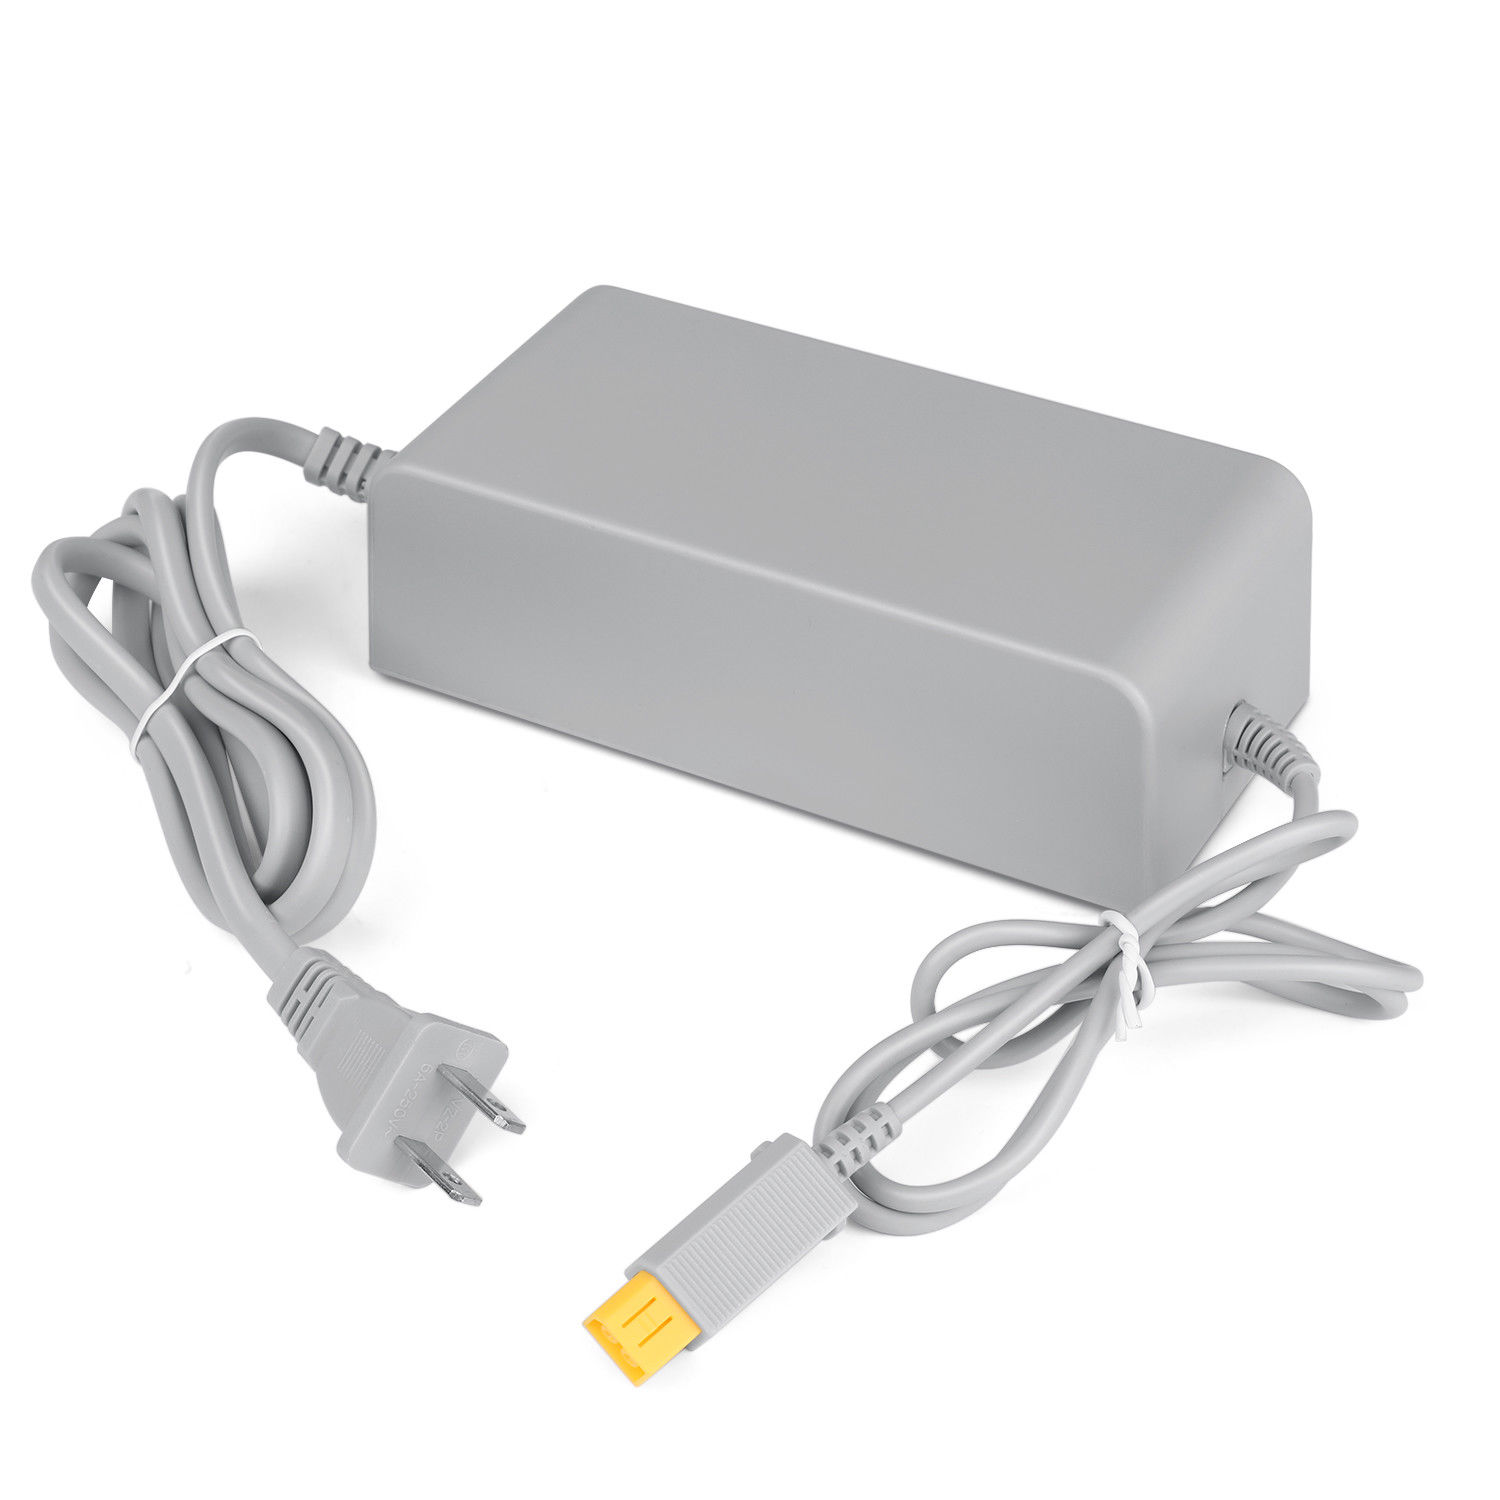 Monitor adapter for mac